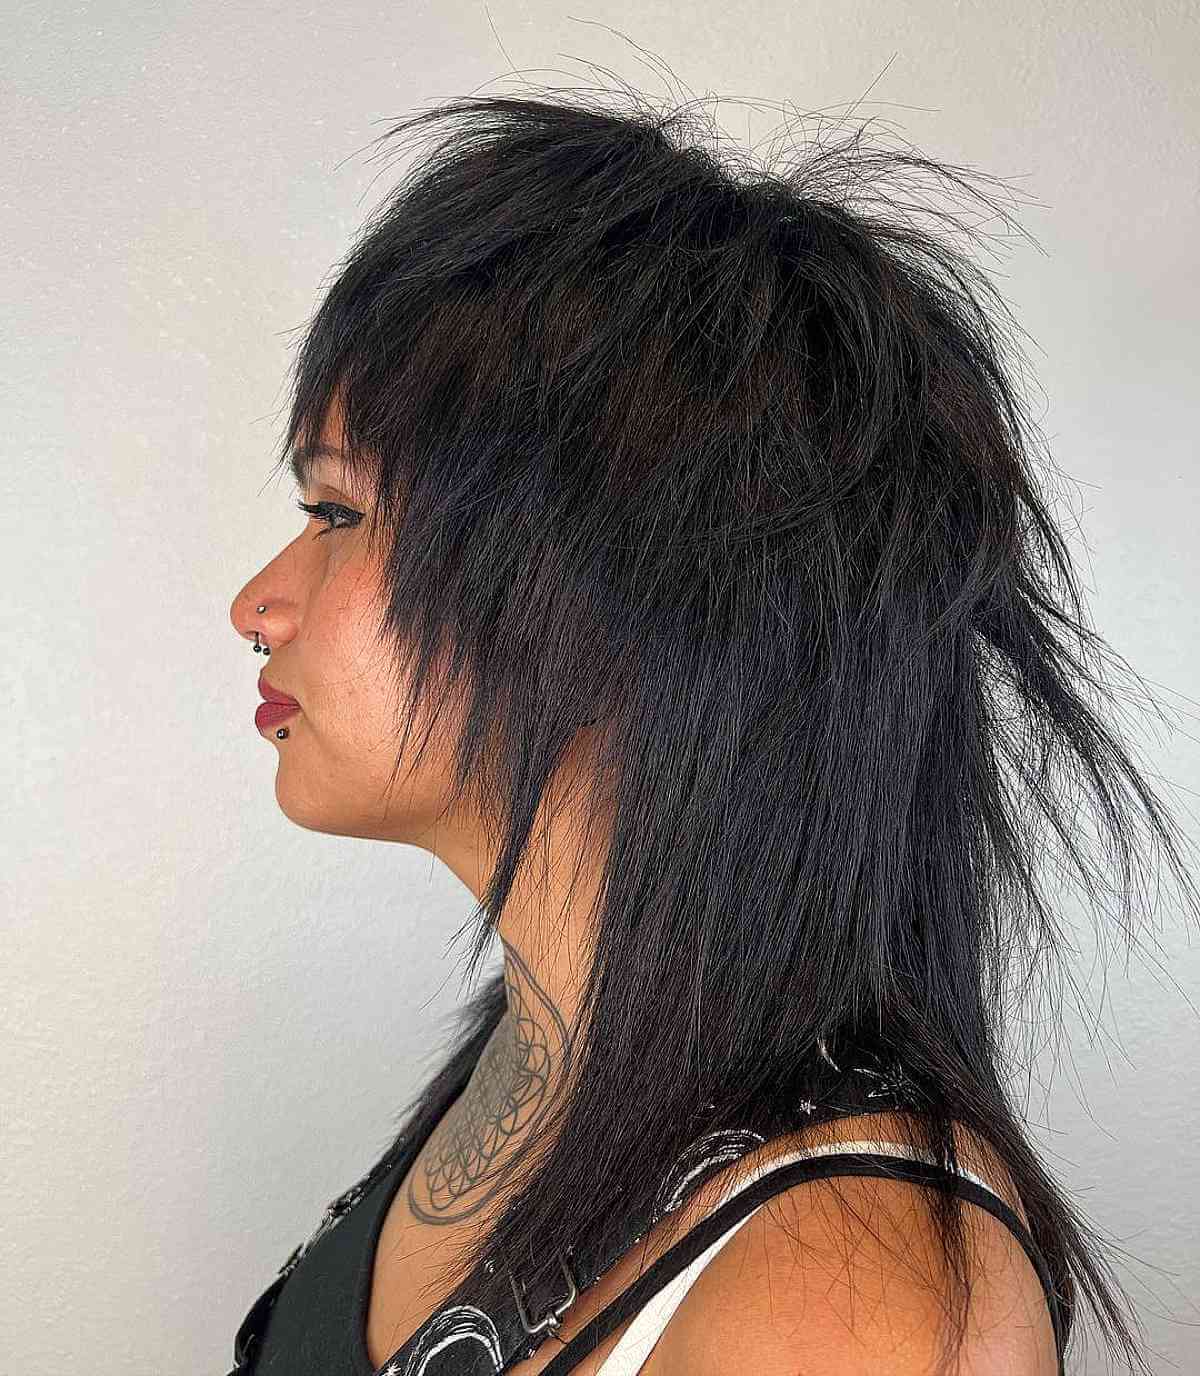 Shagged Mullet with Spiky Ends